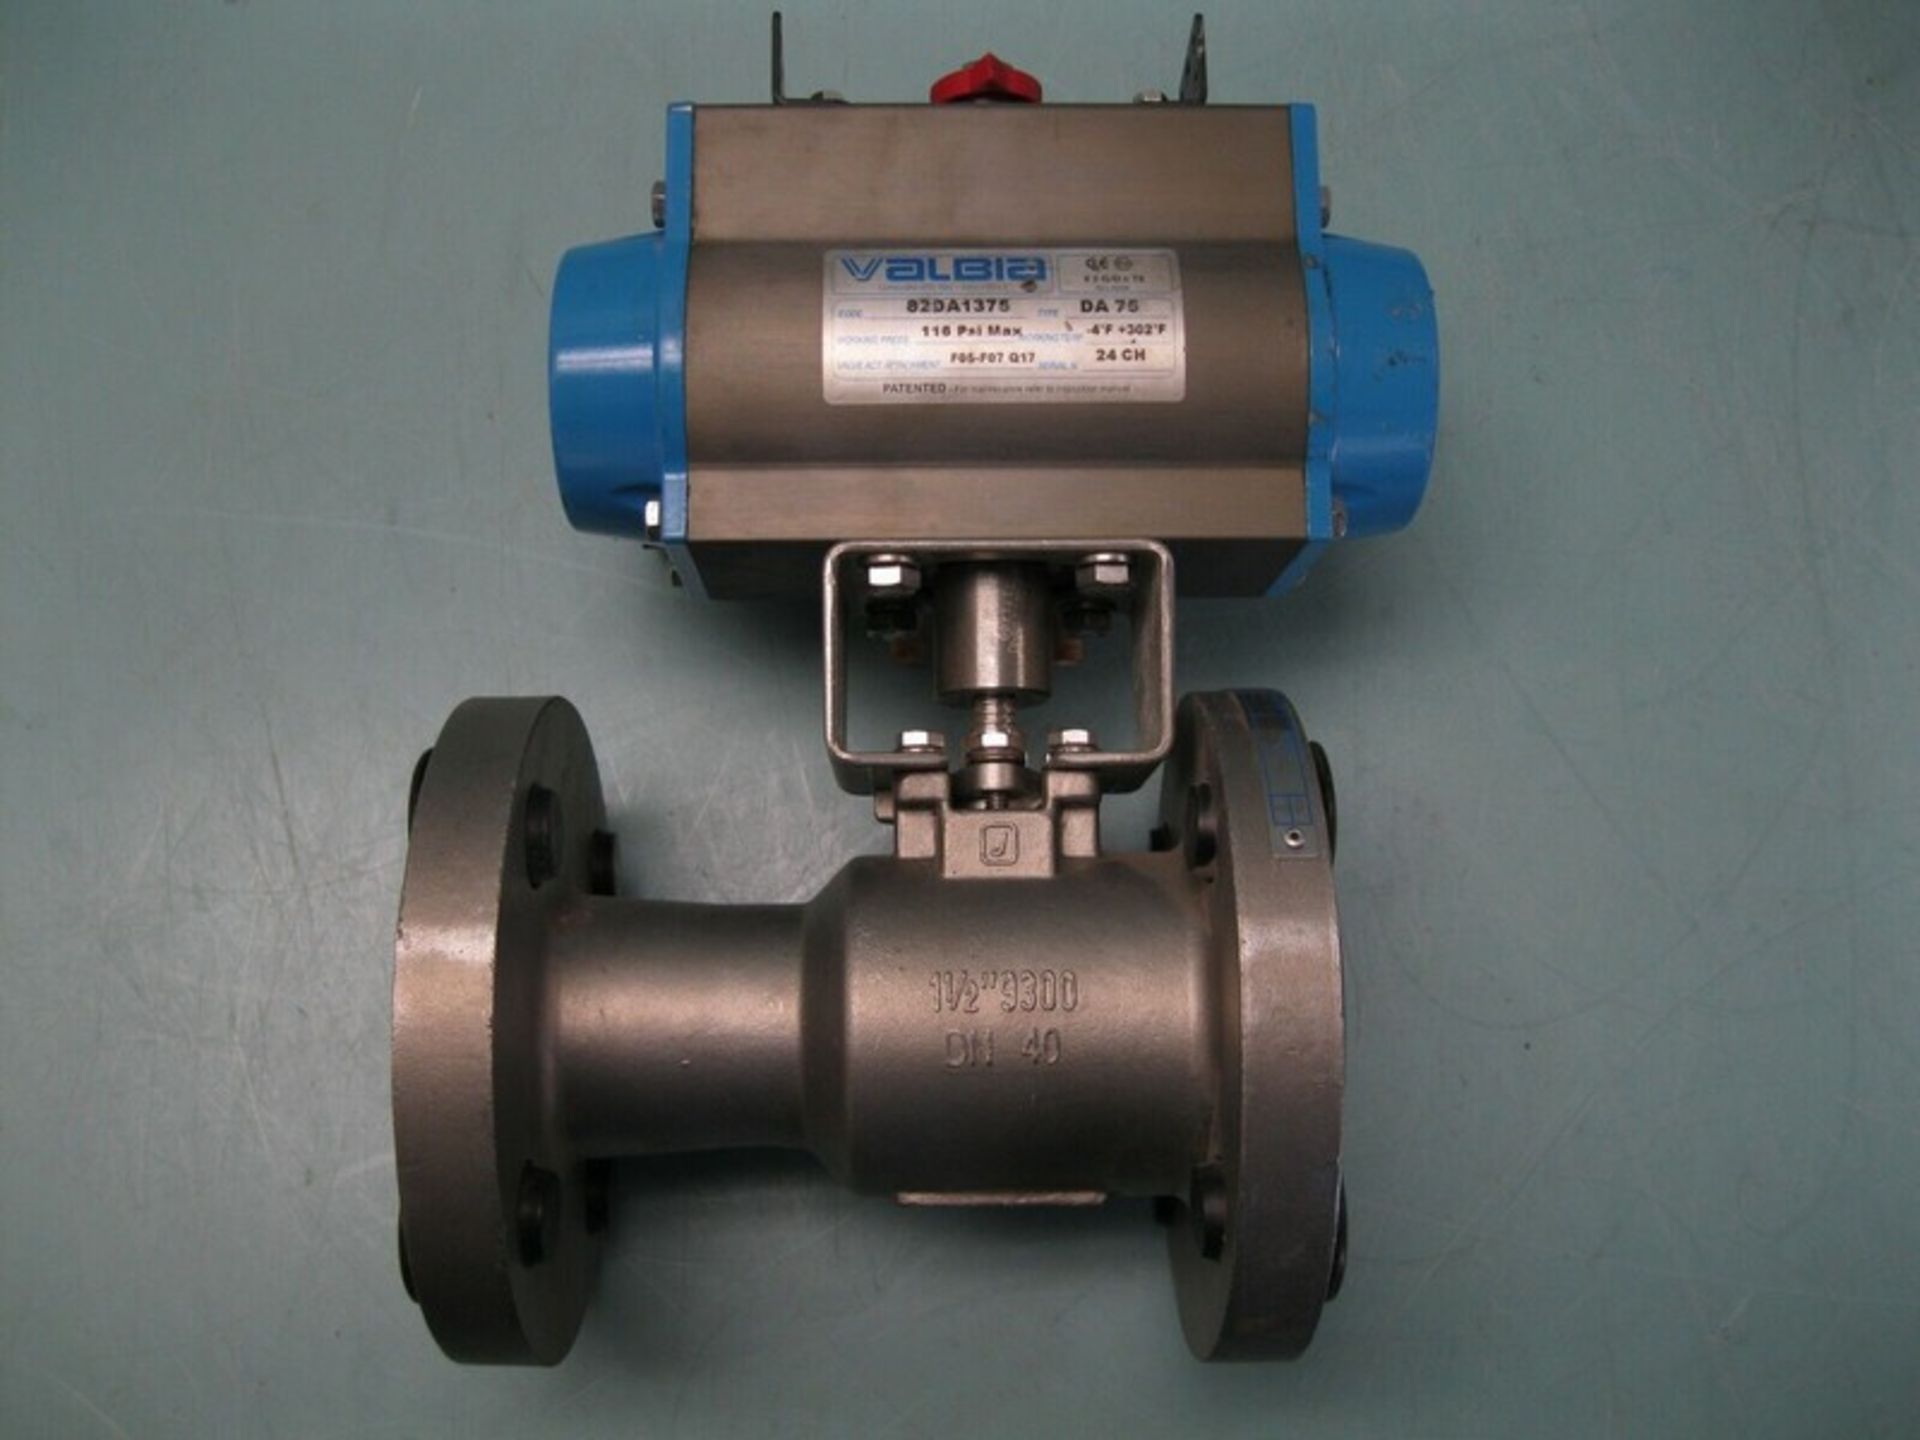 1-1/2" 300# Jamesbury 9300 SS Ball Valve Valbia DA 75 Actuator NEW (NOTE: Packing and Palletizing